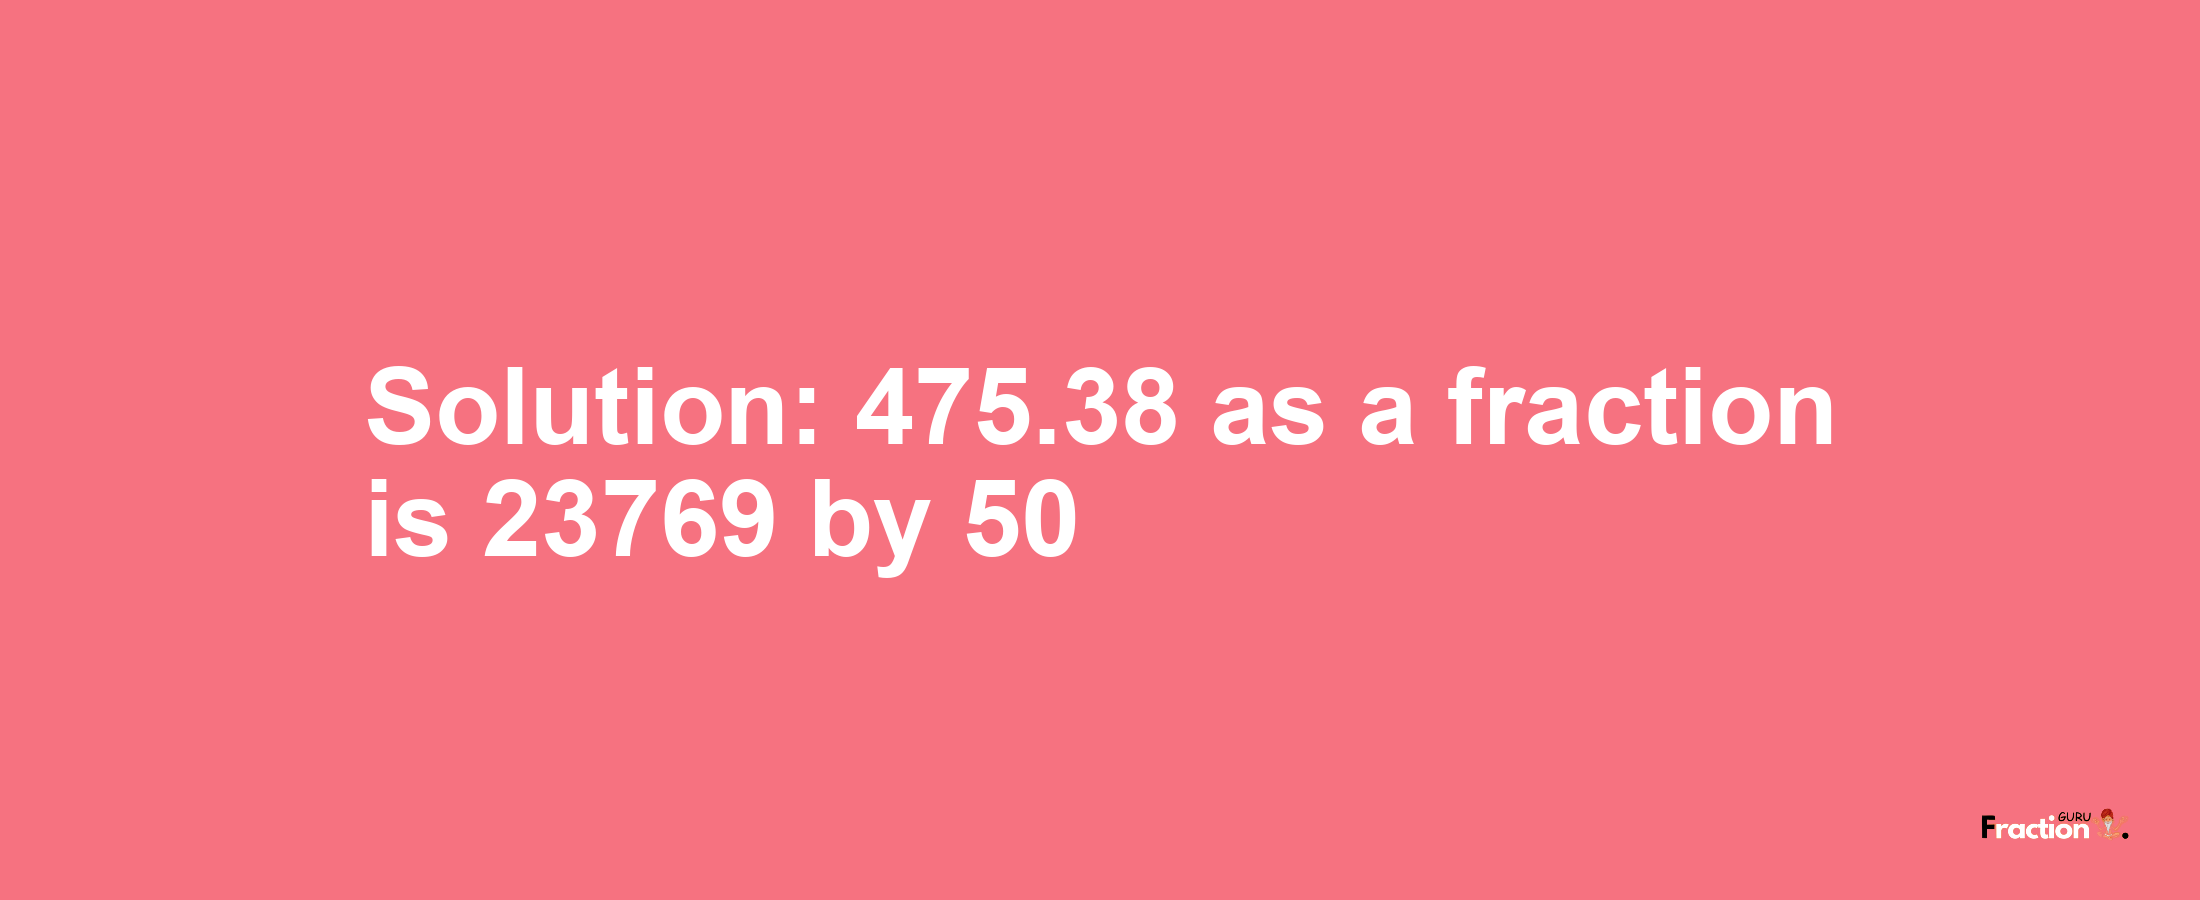 Solution:475.38 as a fraction is 23769/50